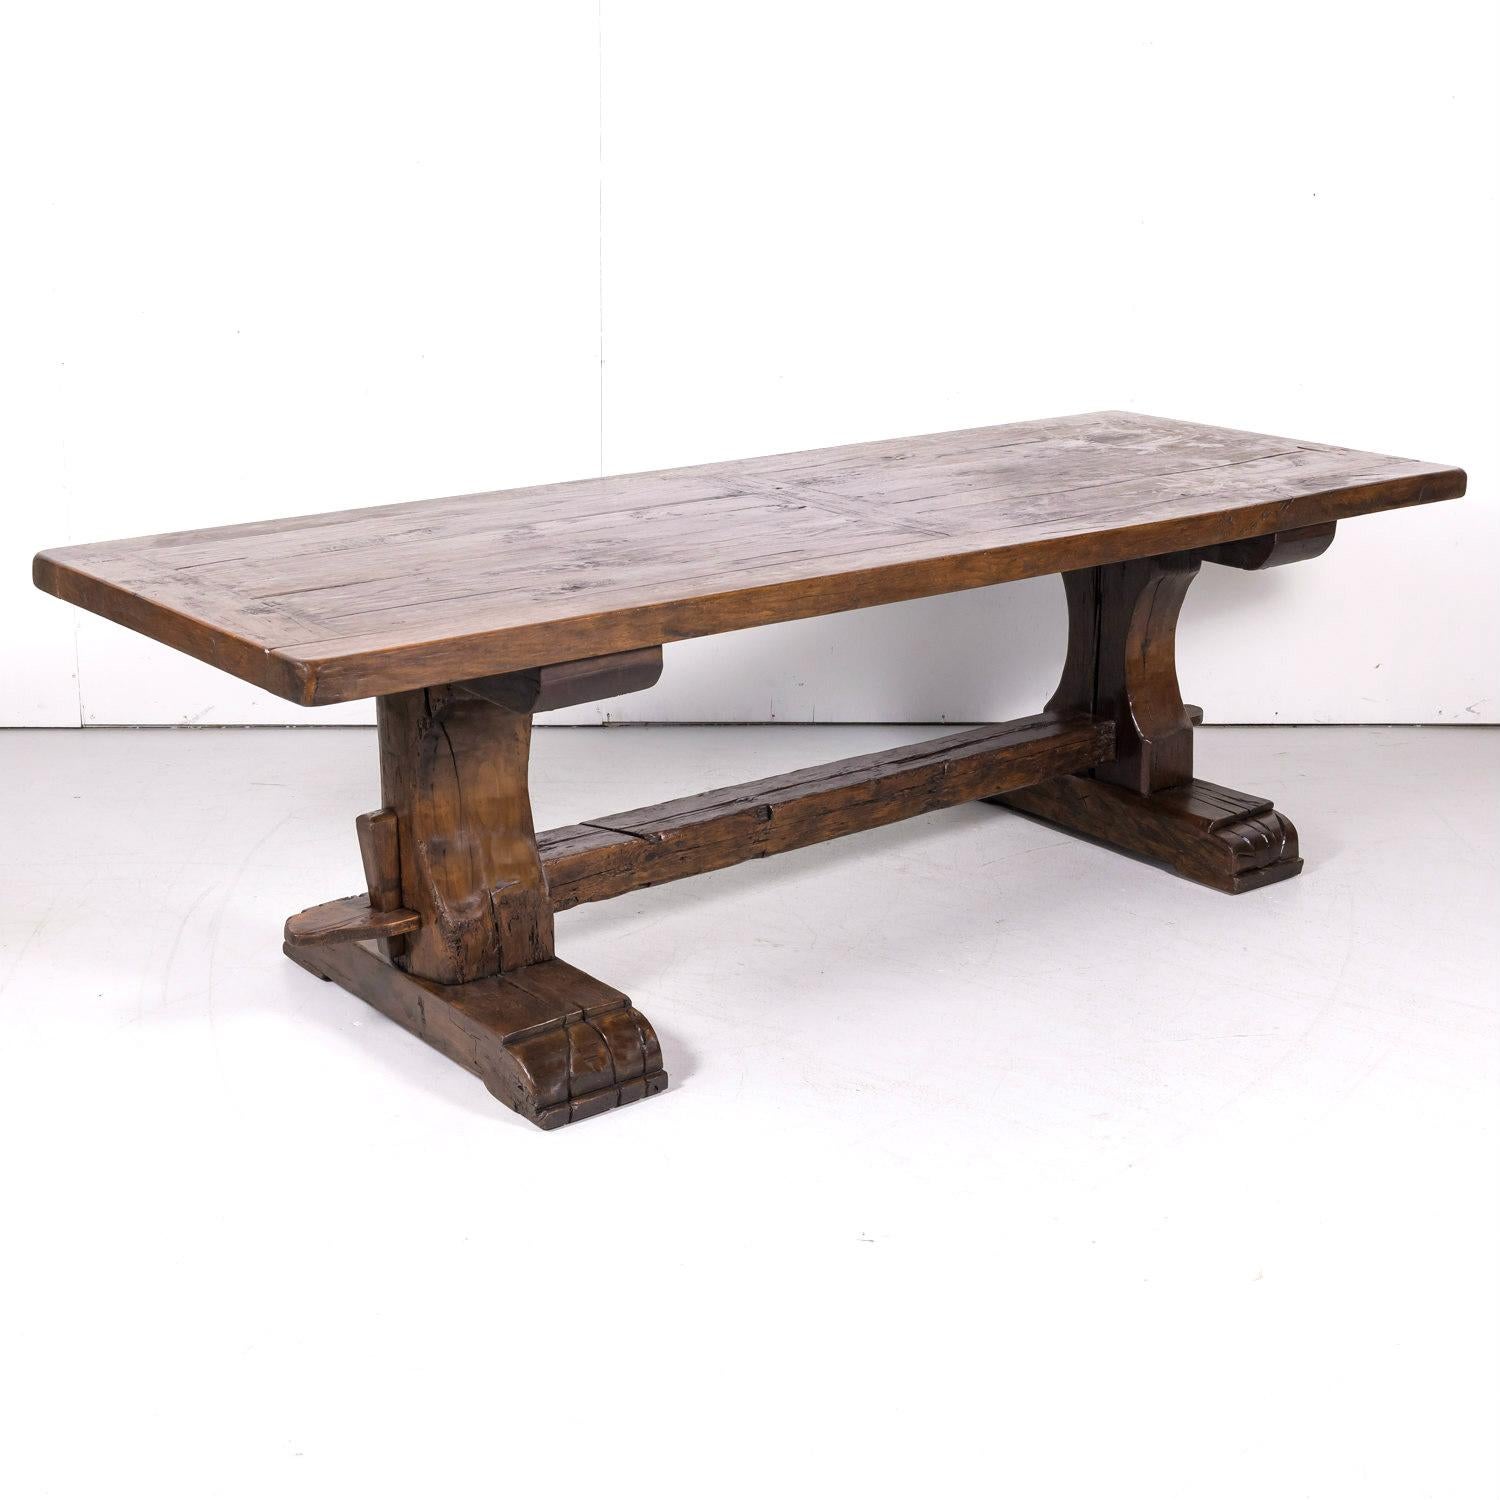 A 19th century French monastery trestle table handcrafted in Provence near Avignon of old growth French oak, circa 1890s. Having a banded plank top supported by carved trestle legs on plinth bases, each joined by a thick center stretcher, circa